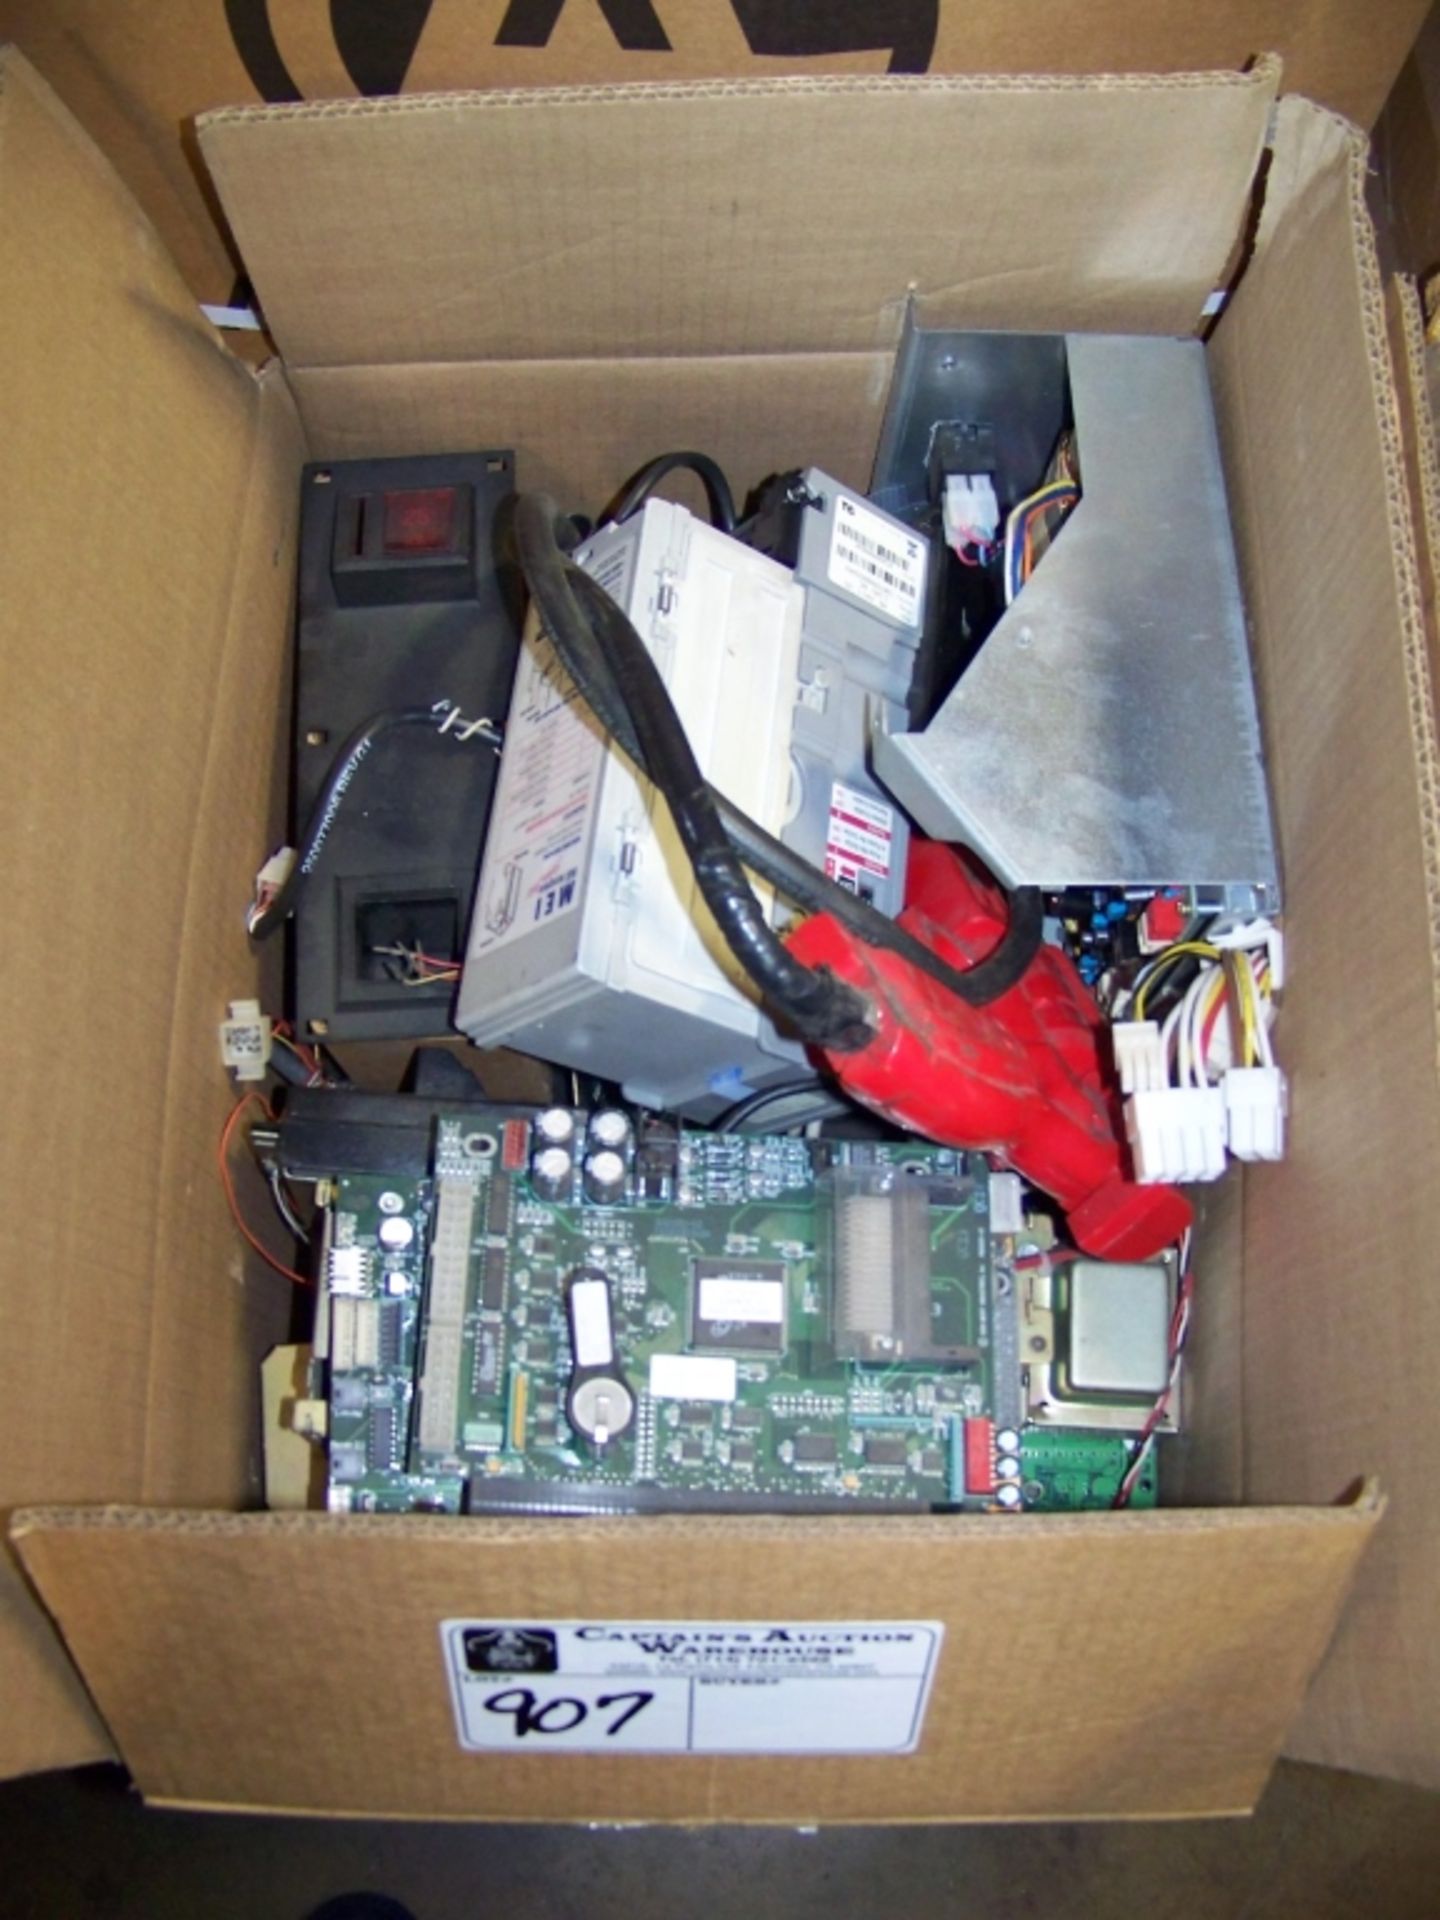 1 BOX LOT MISC. BILL ACCEPTORS,DBA, MECHS Item is in used condition. Evidence of wear and commercial